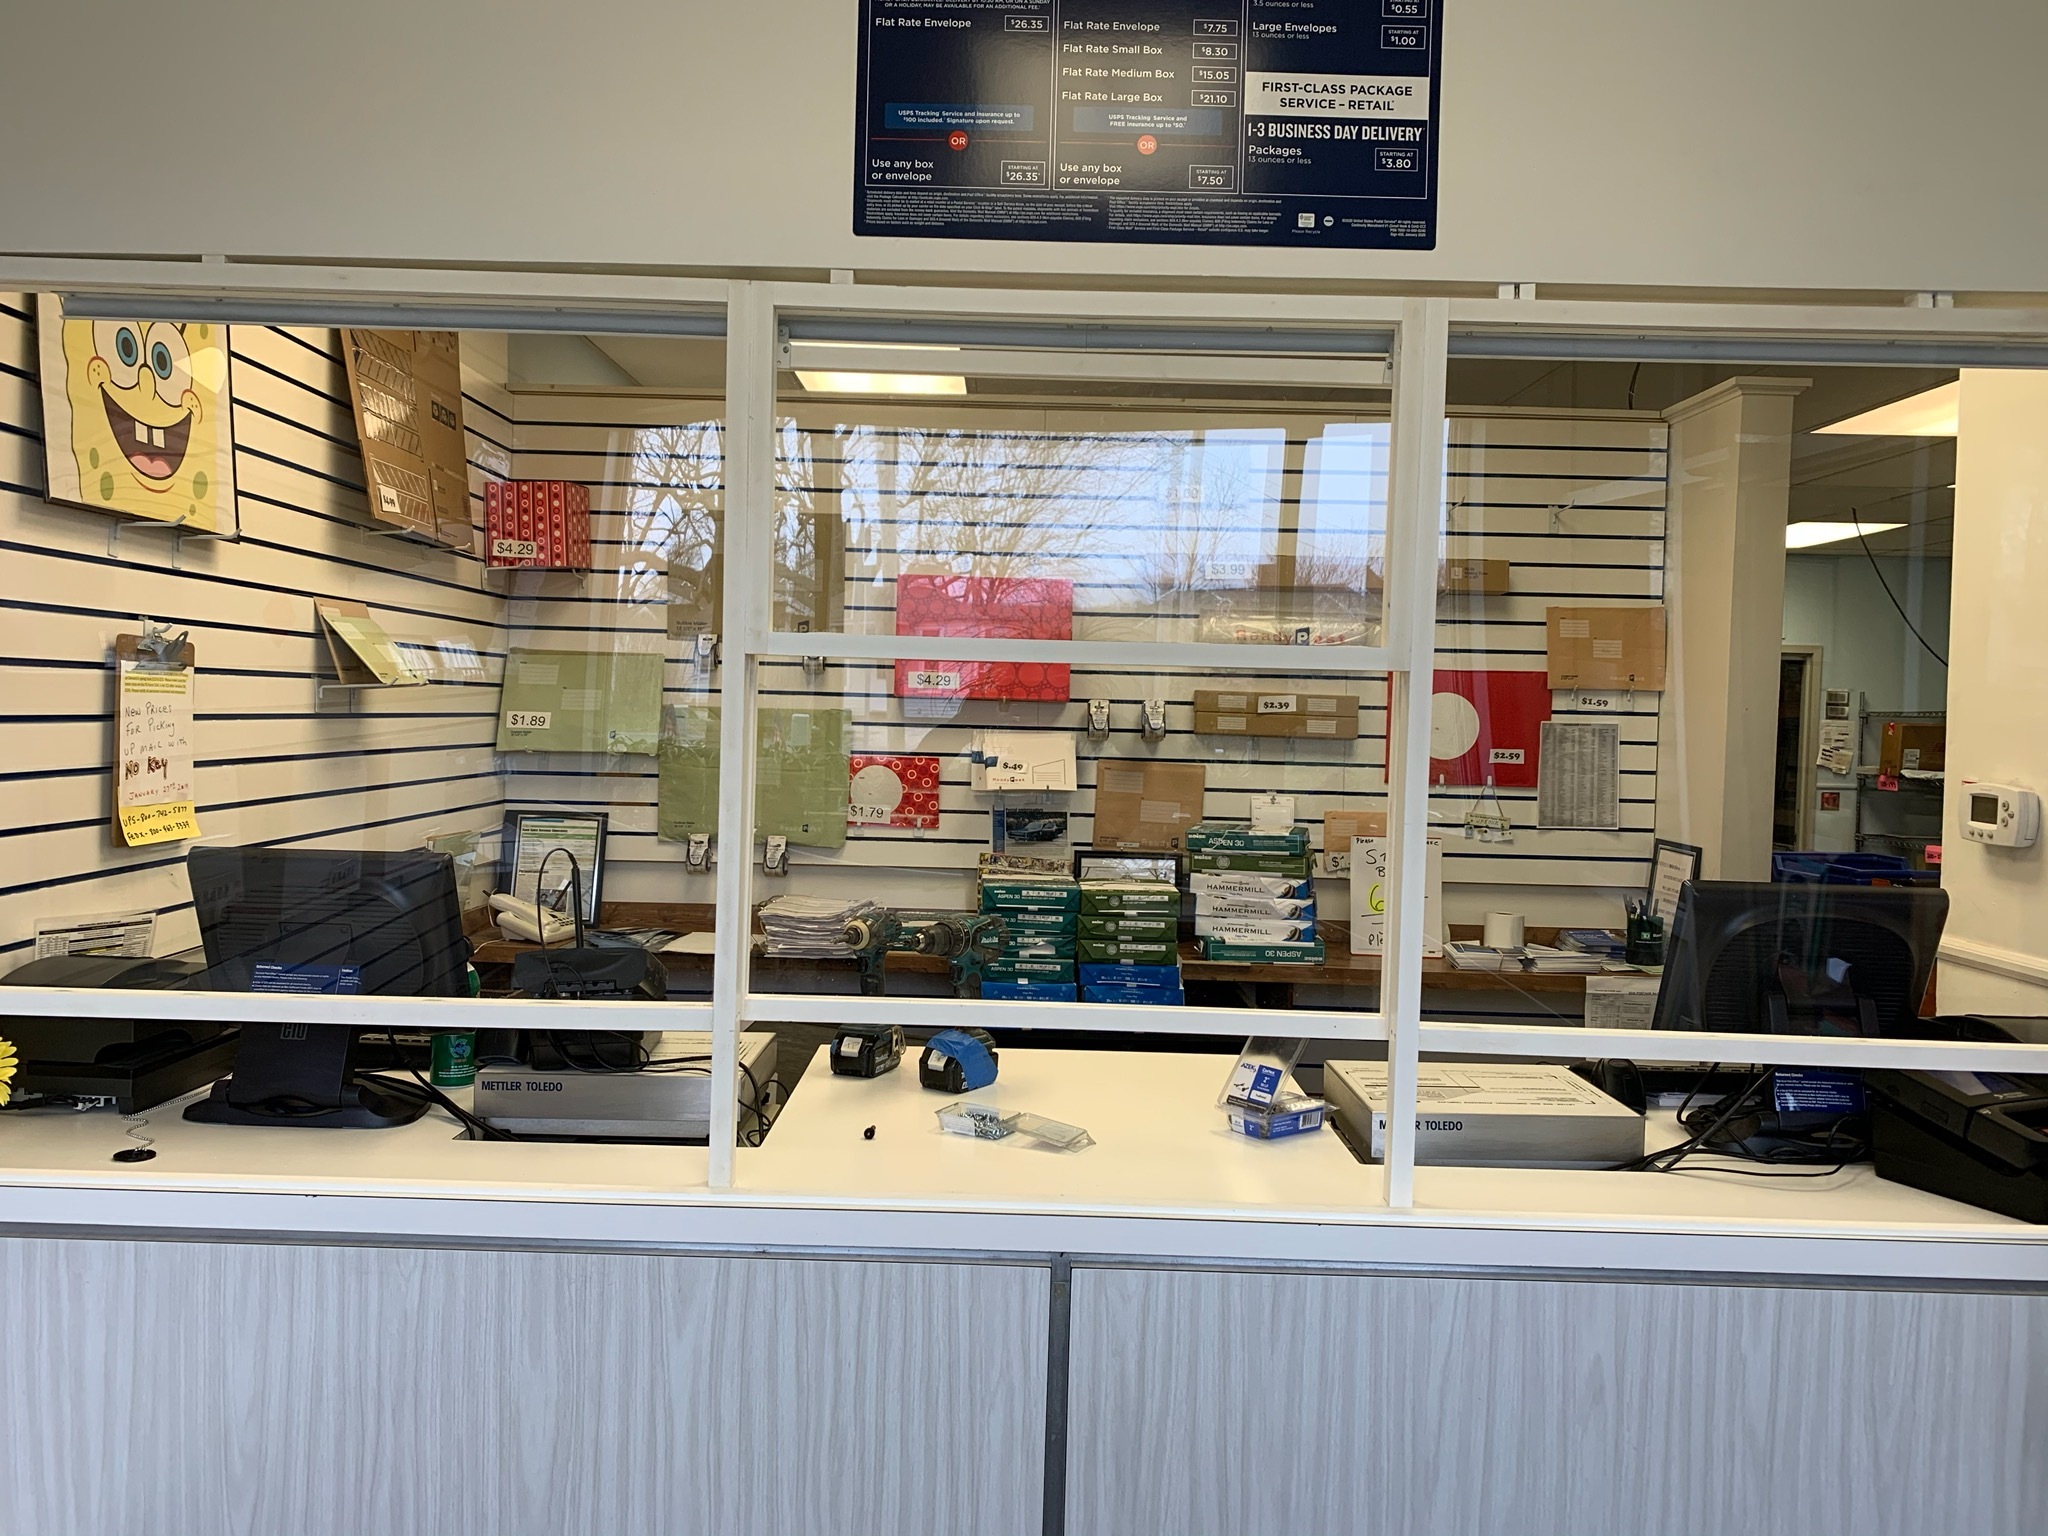 At the Speonk Post Office, new acryllic windows were installed to protect workers and the public. 